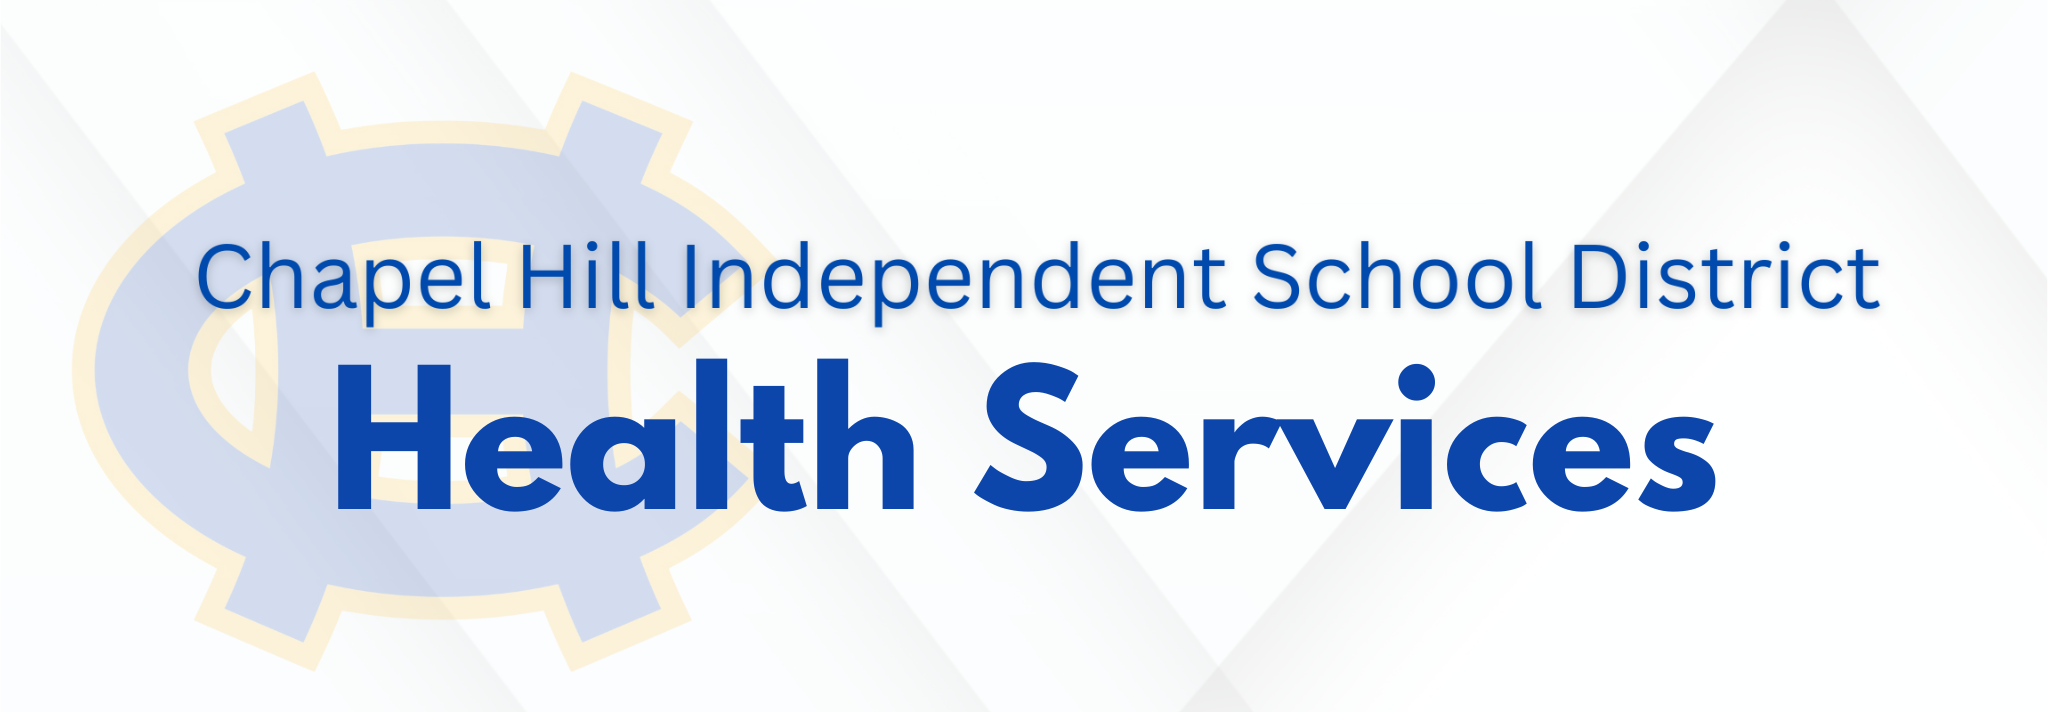 Chapel Hill ISD Health Services